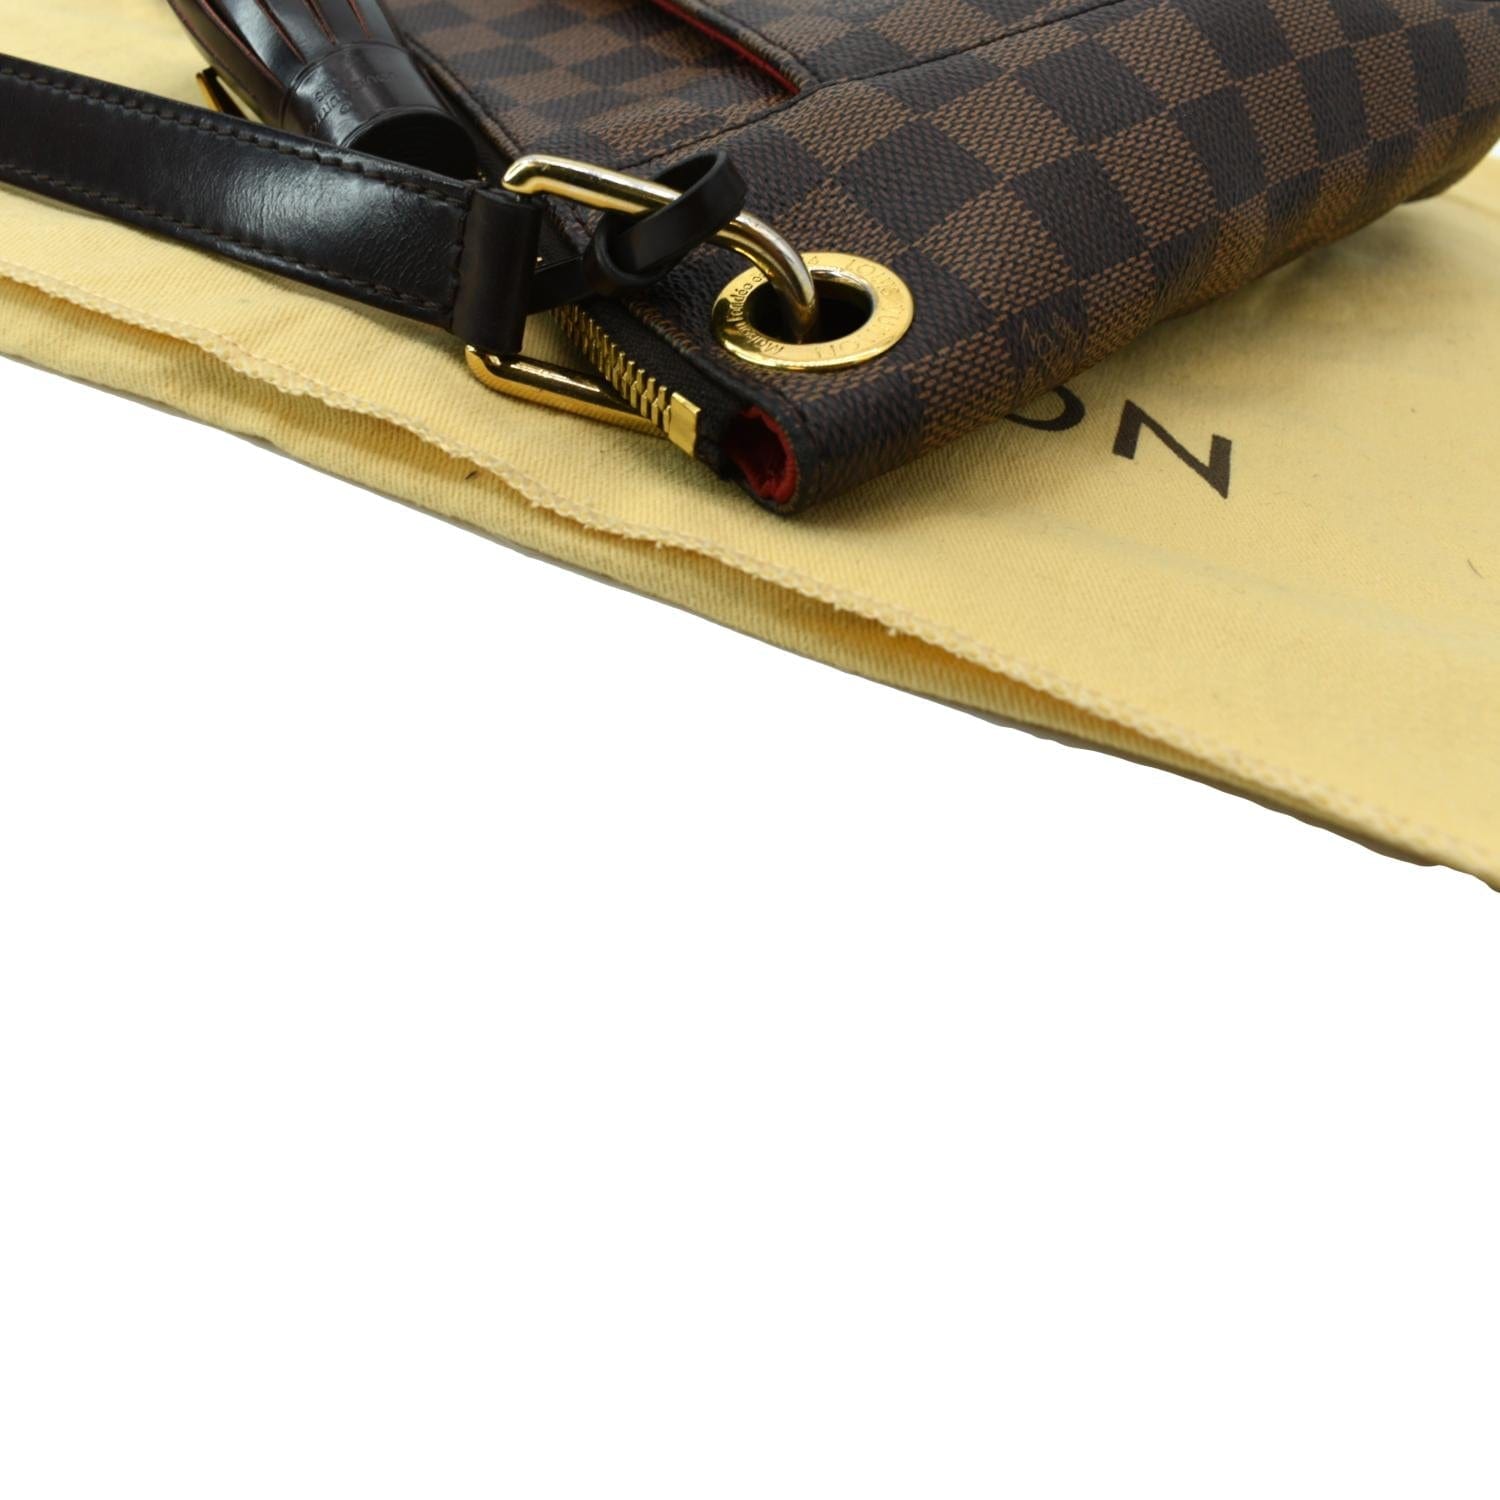 vuitton besace south